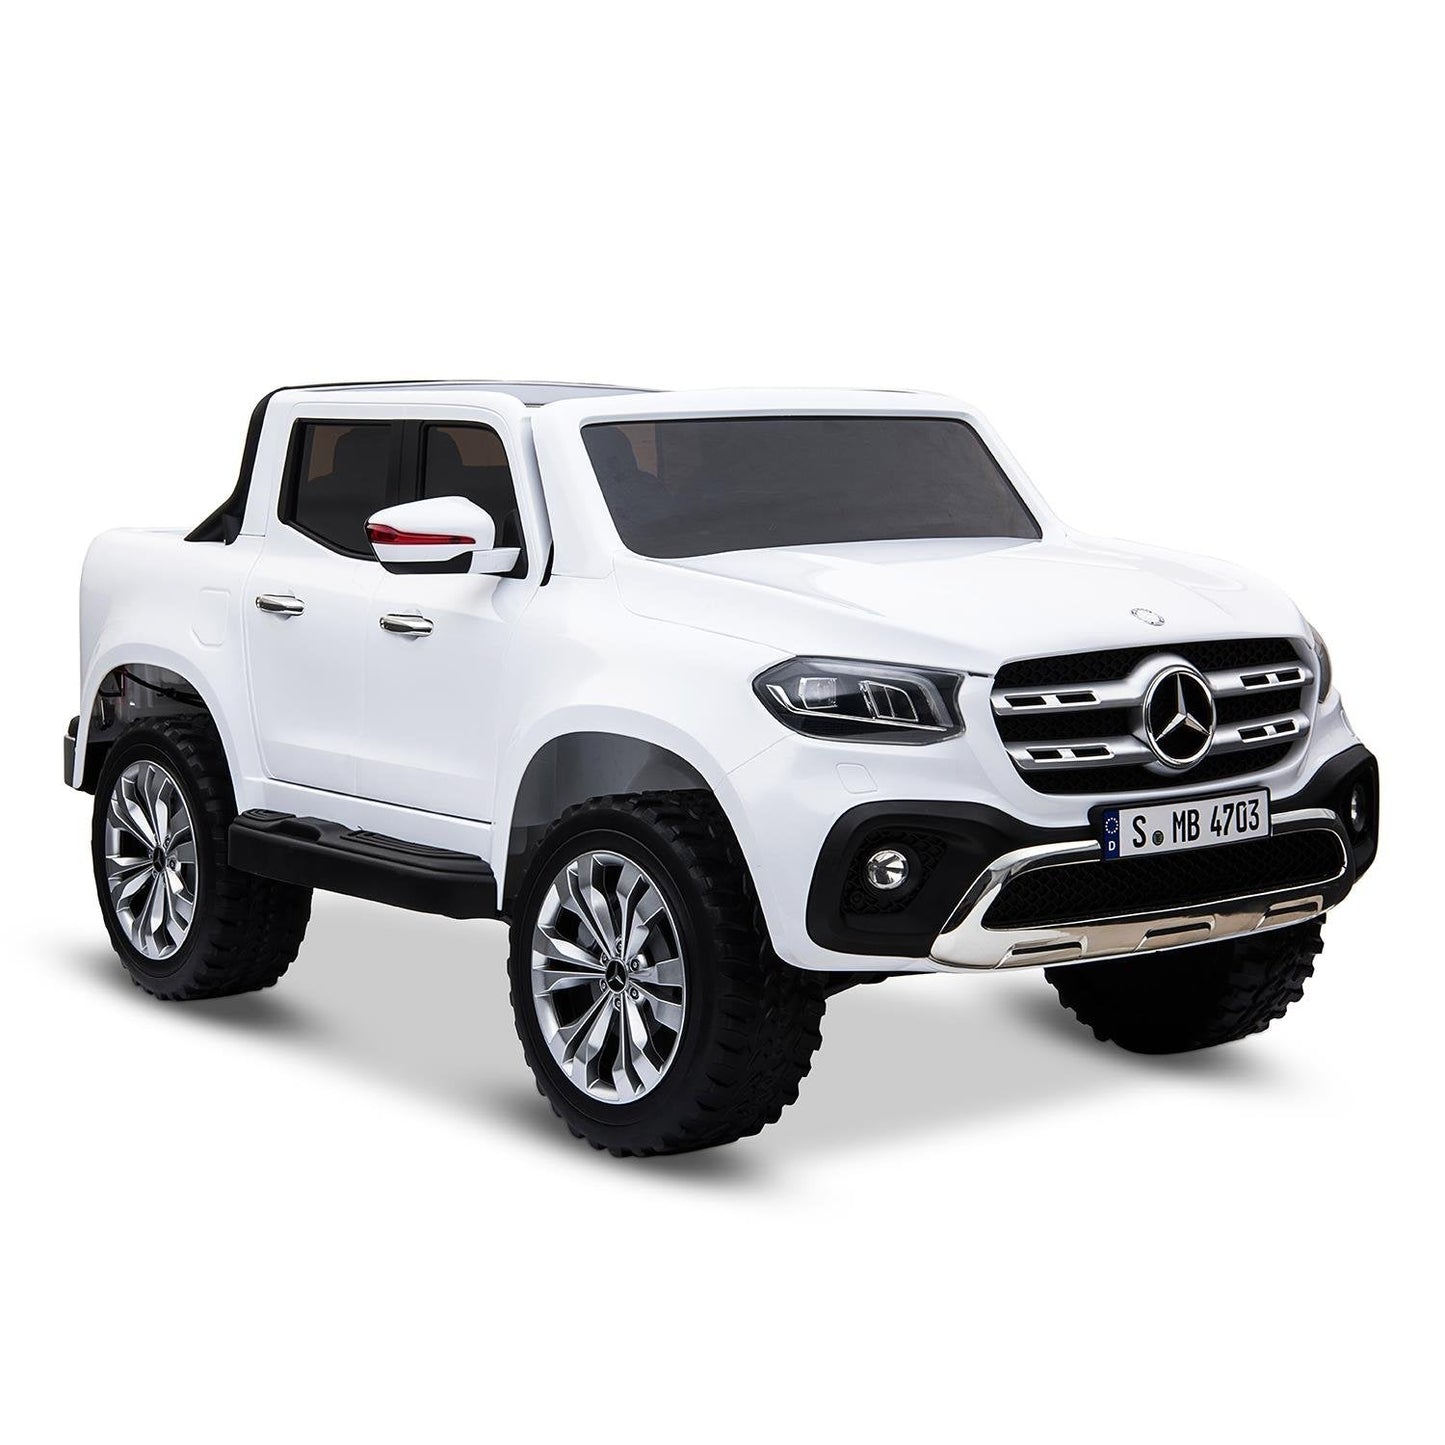 White Mercedes-Benz X Class pickup truck electric ride-on toy for kids on a white background.